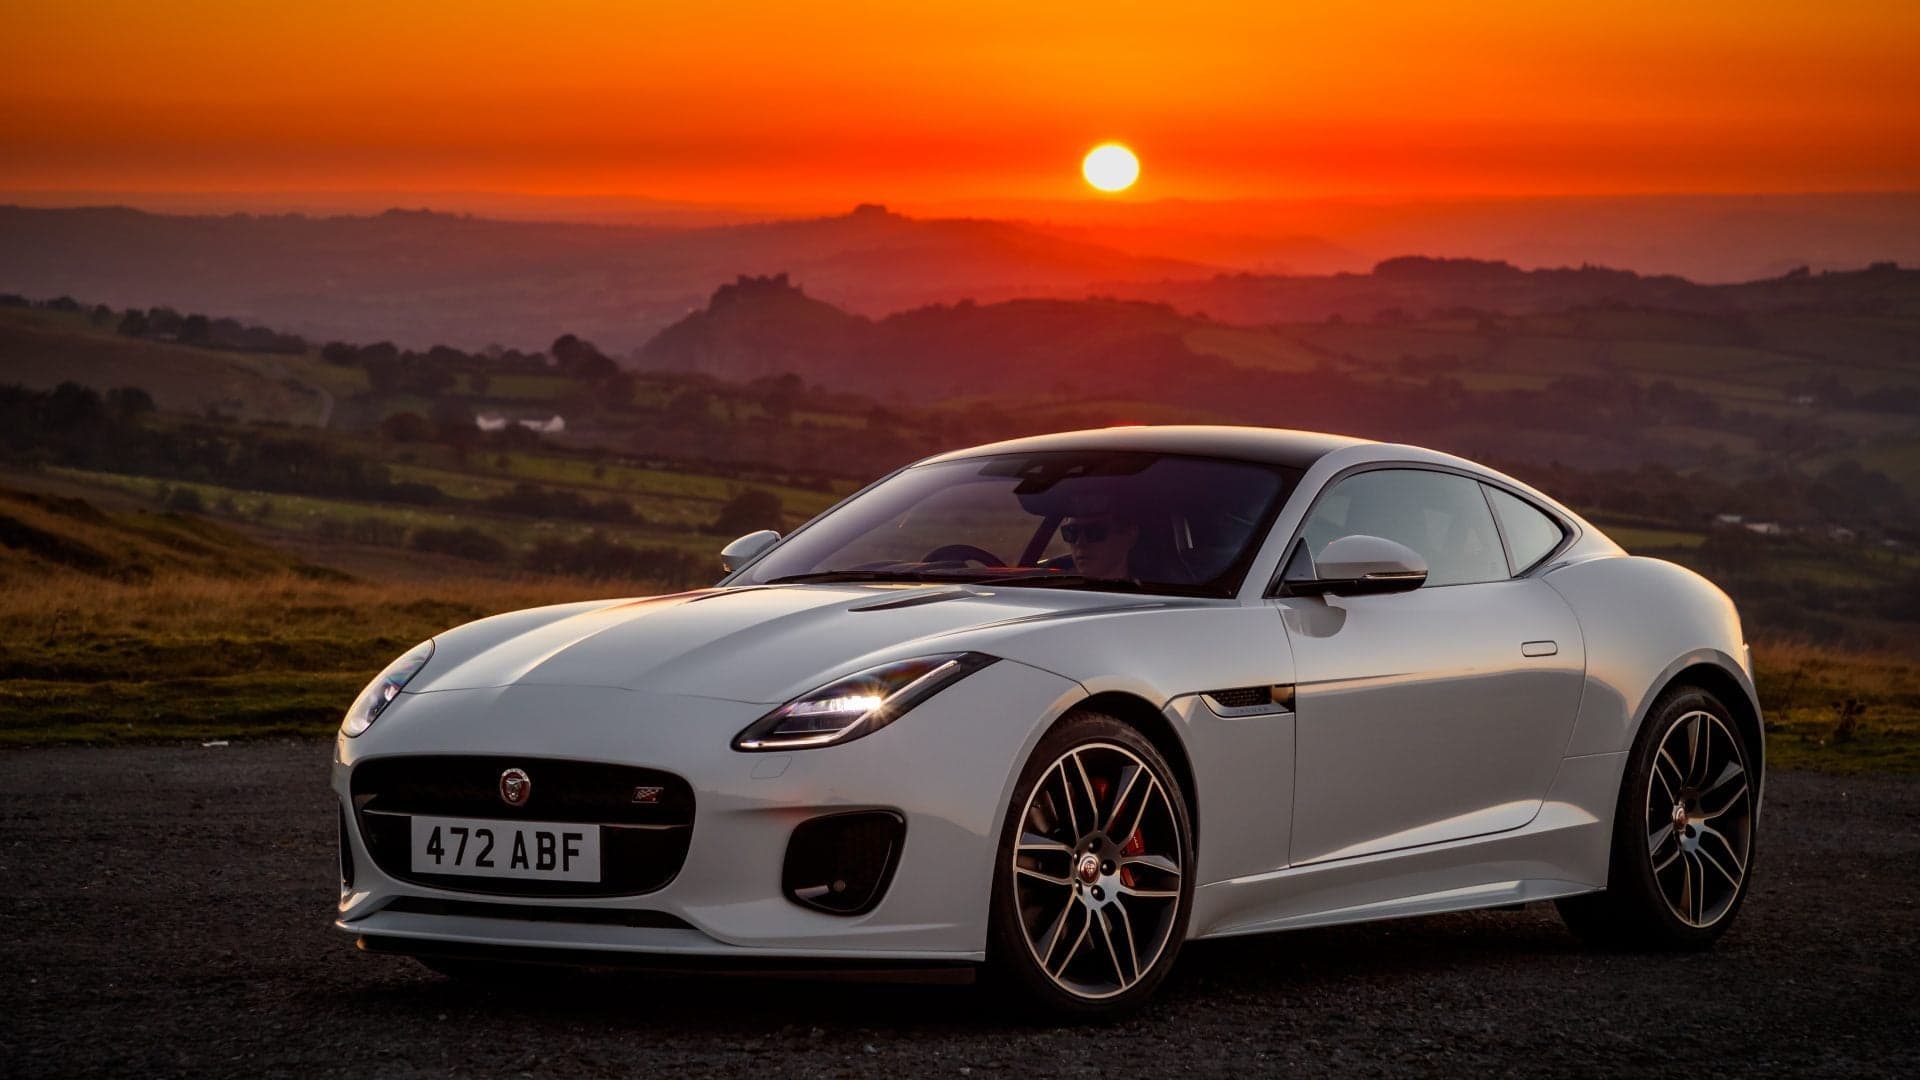 Jaguar Wants Buyers to Pay an Extra $10,000 for Checkered Flag Badges On an F-Type